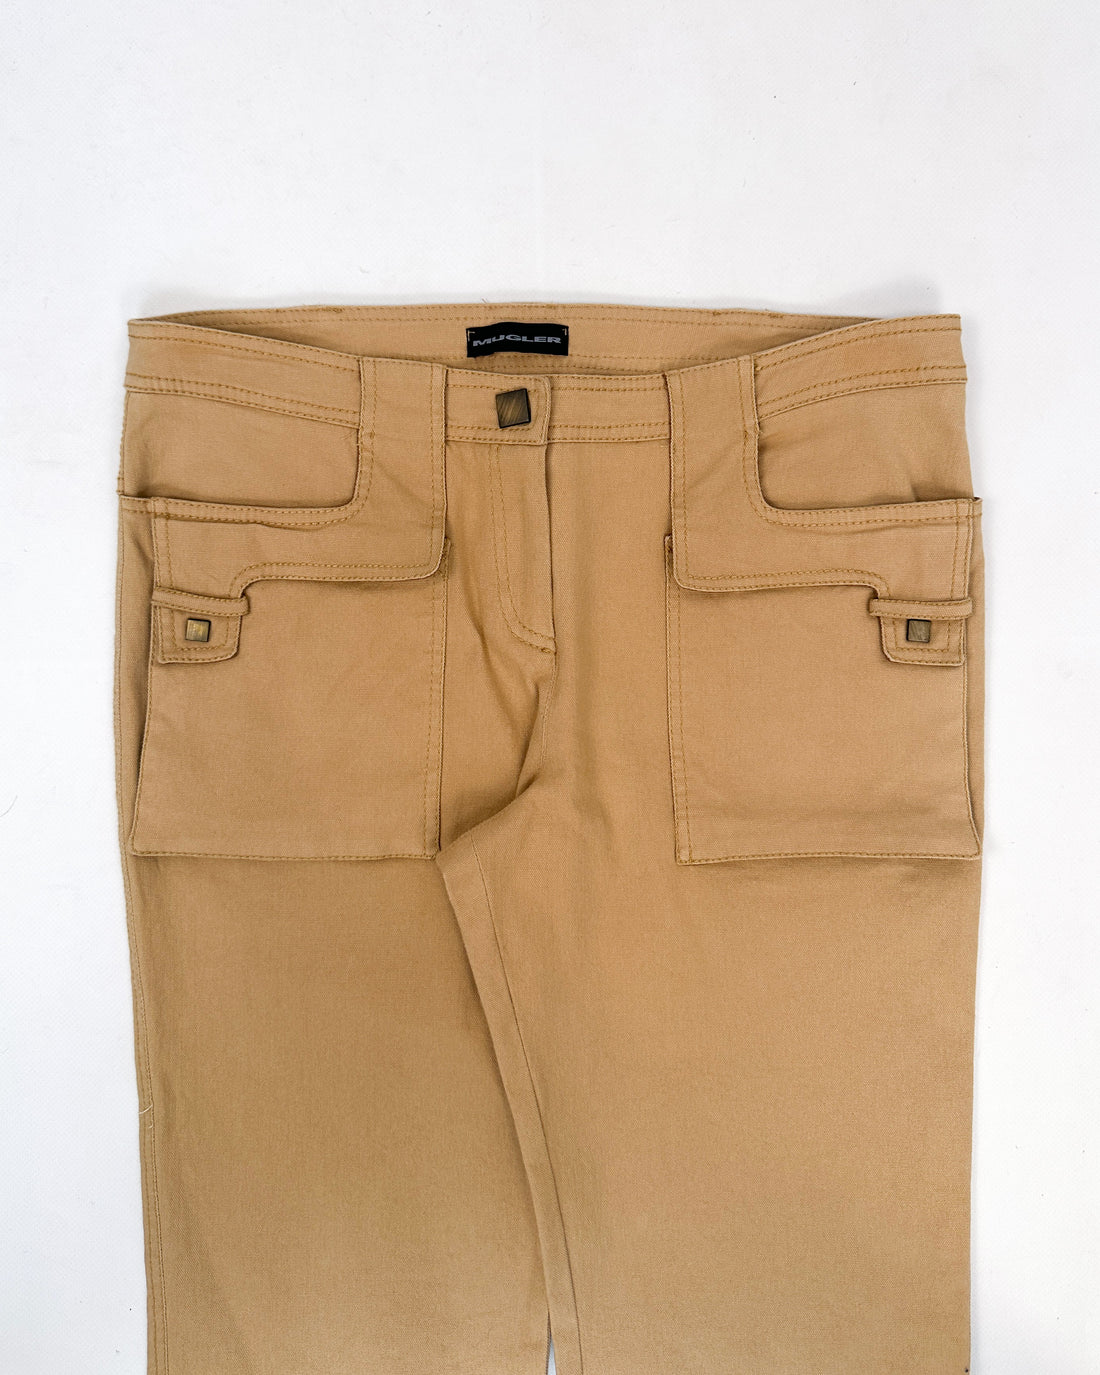 Thierry Mugler Doble Pocket Camel Straight Pants 2000's